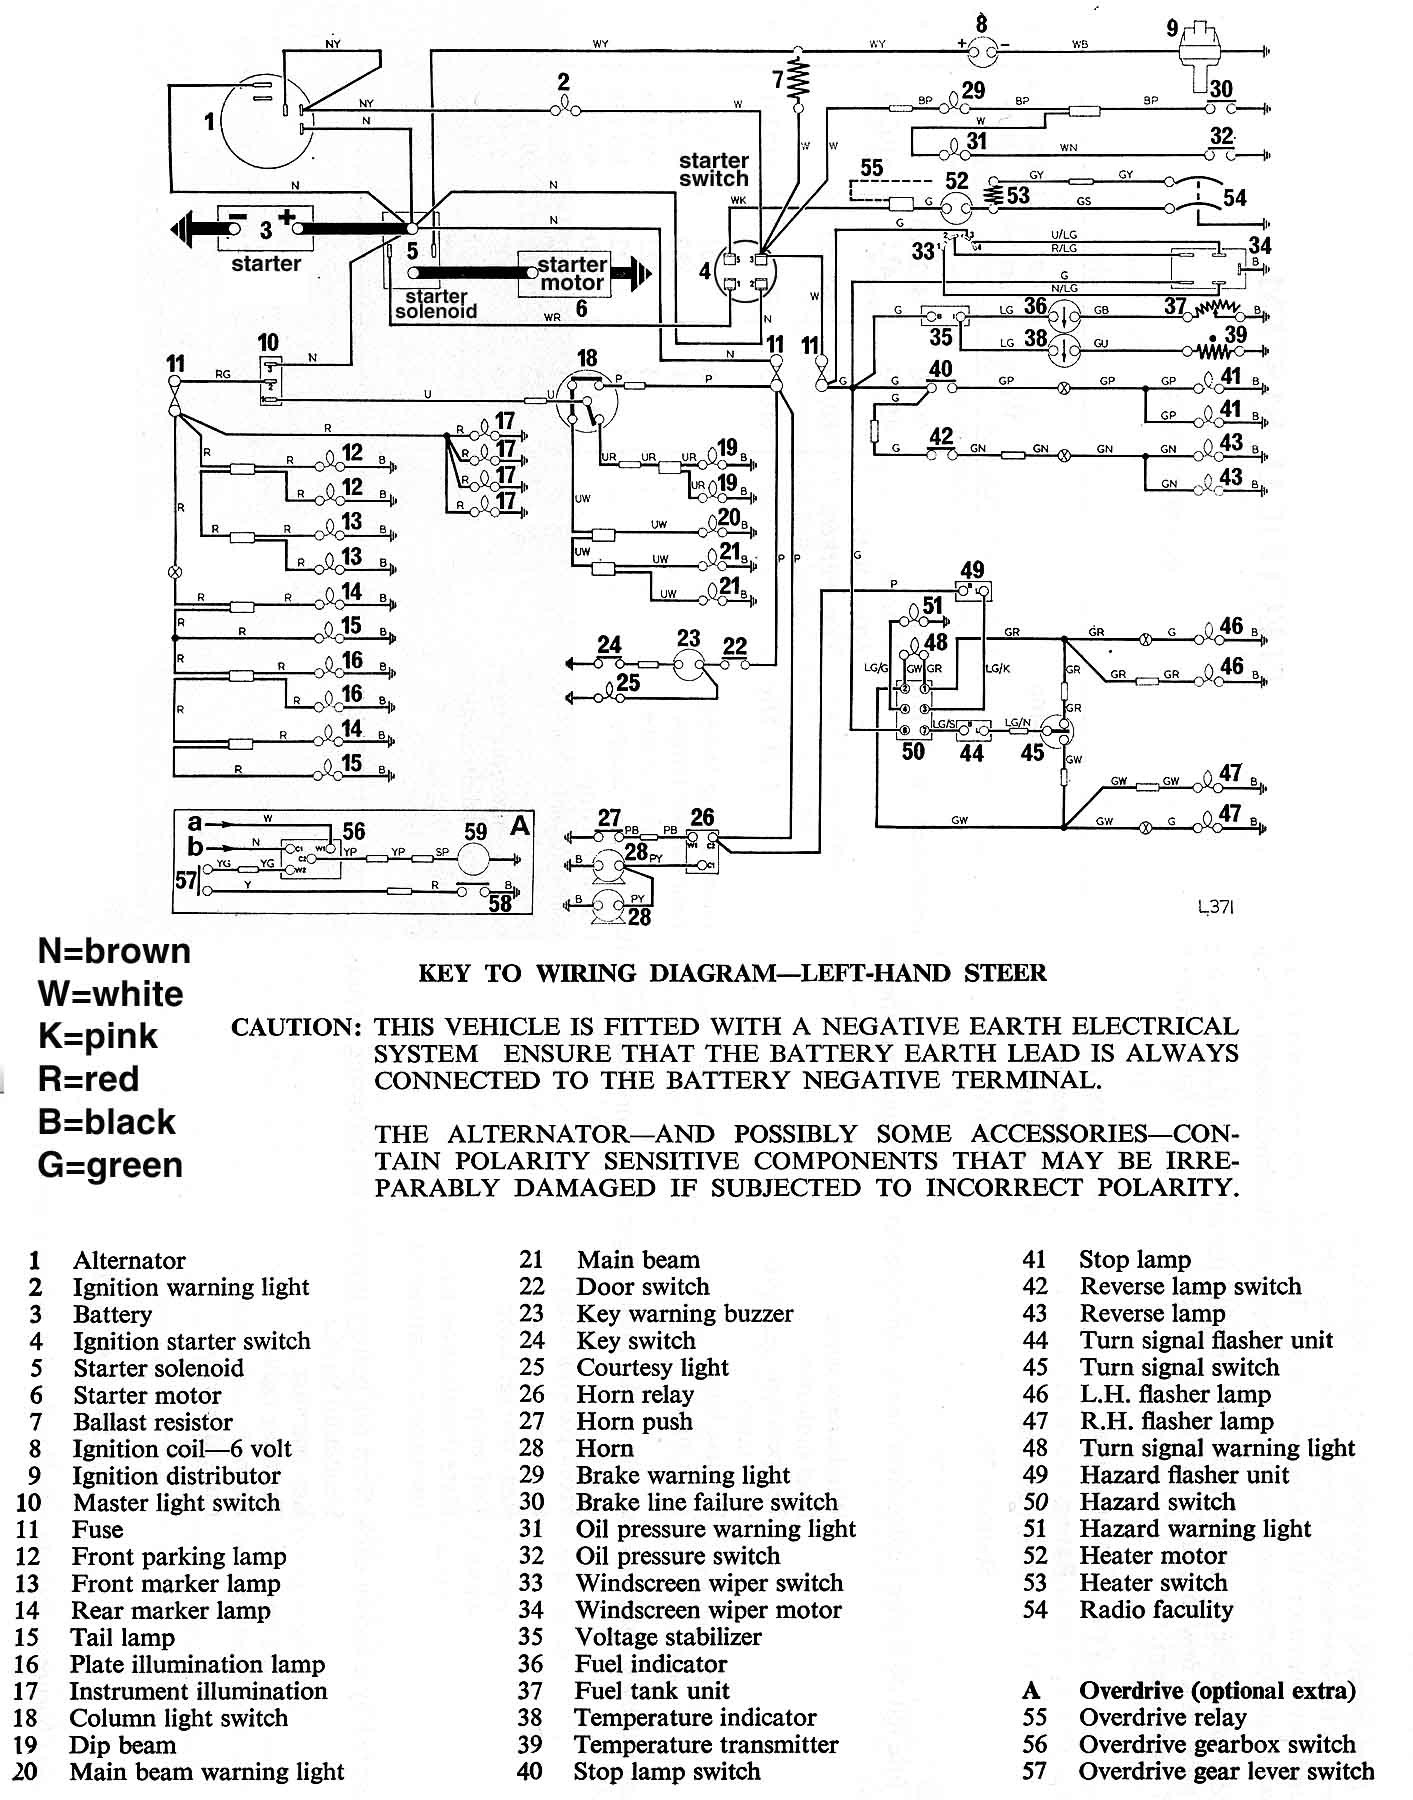 Here is a MkIV wiring diagram